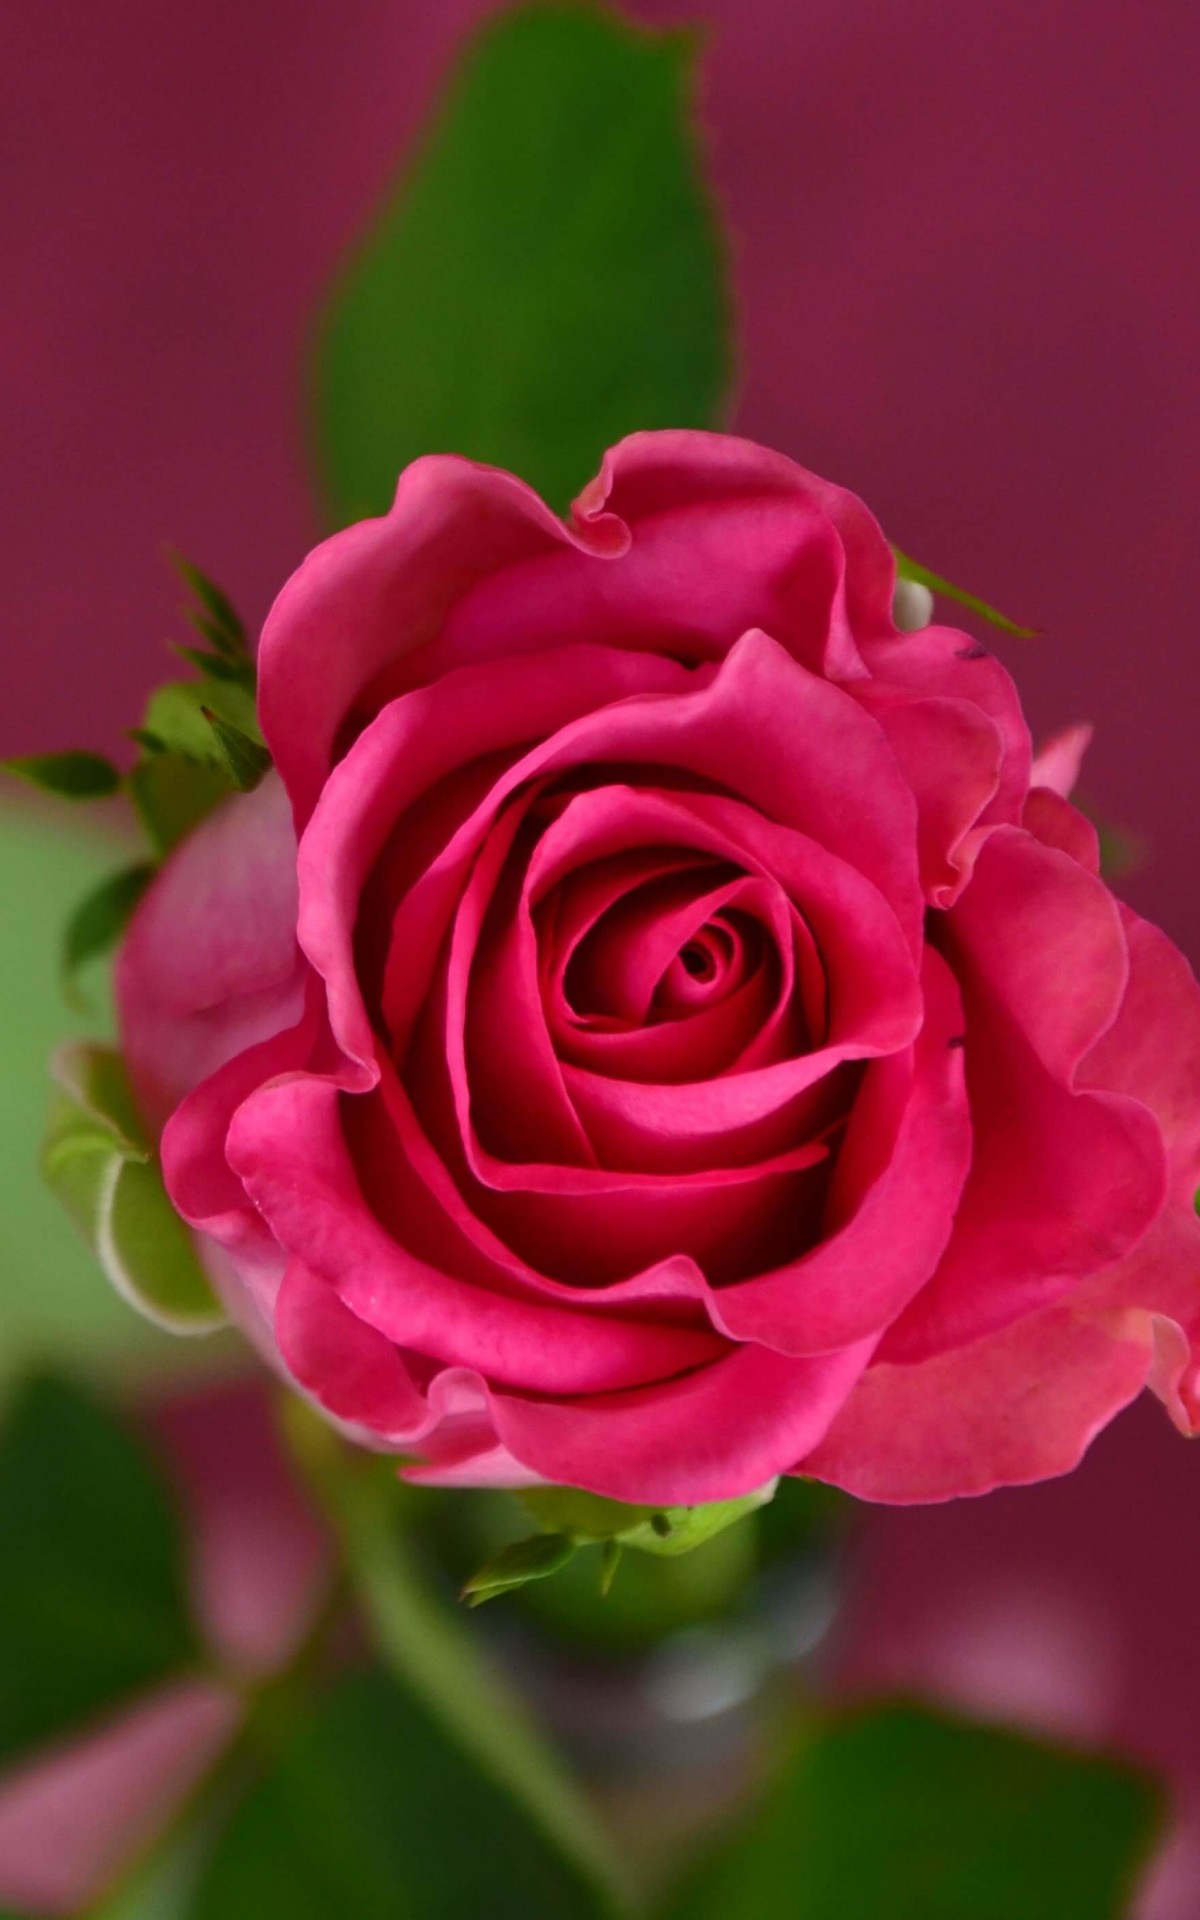 Single Pink Rose Wallpaper for Amazon Kindle Fire HDX